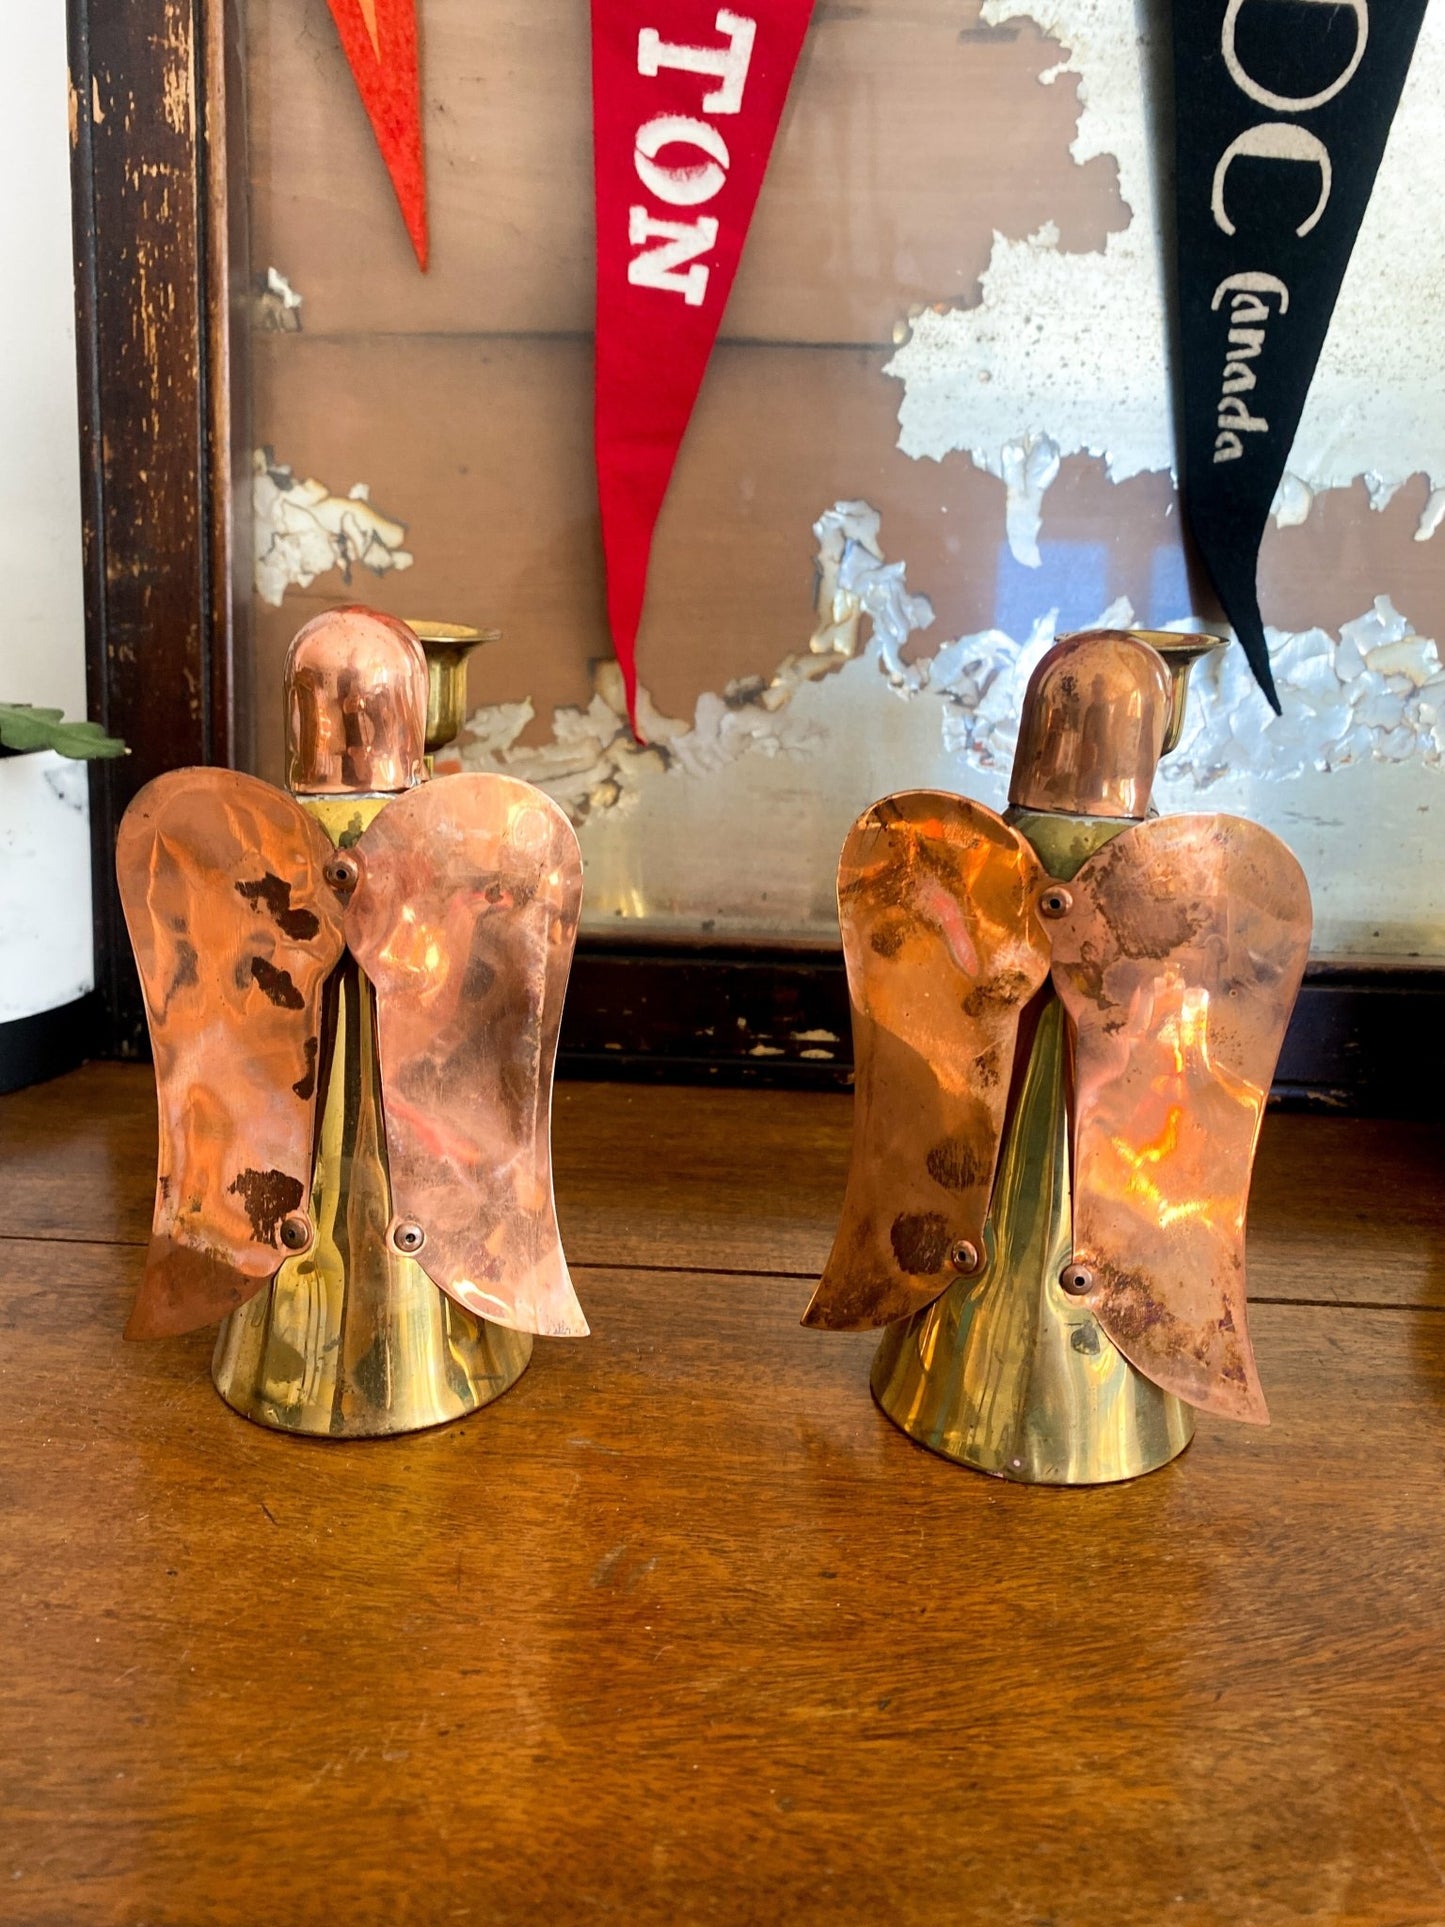 Eaton’s Brass and Copper Angel Candleholder - Perth Market